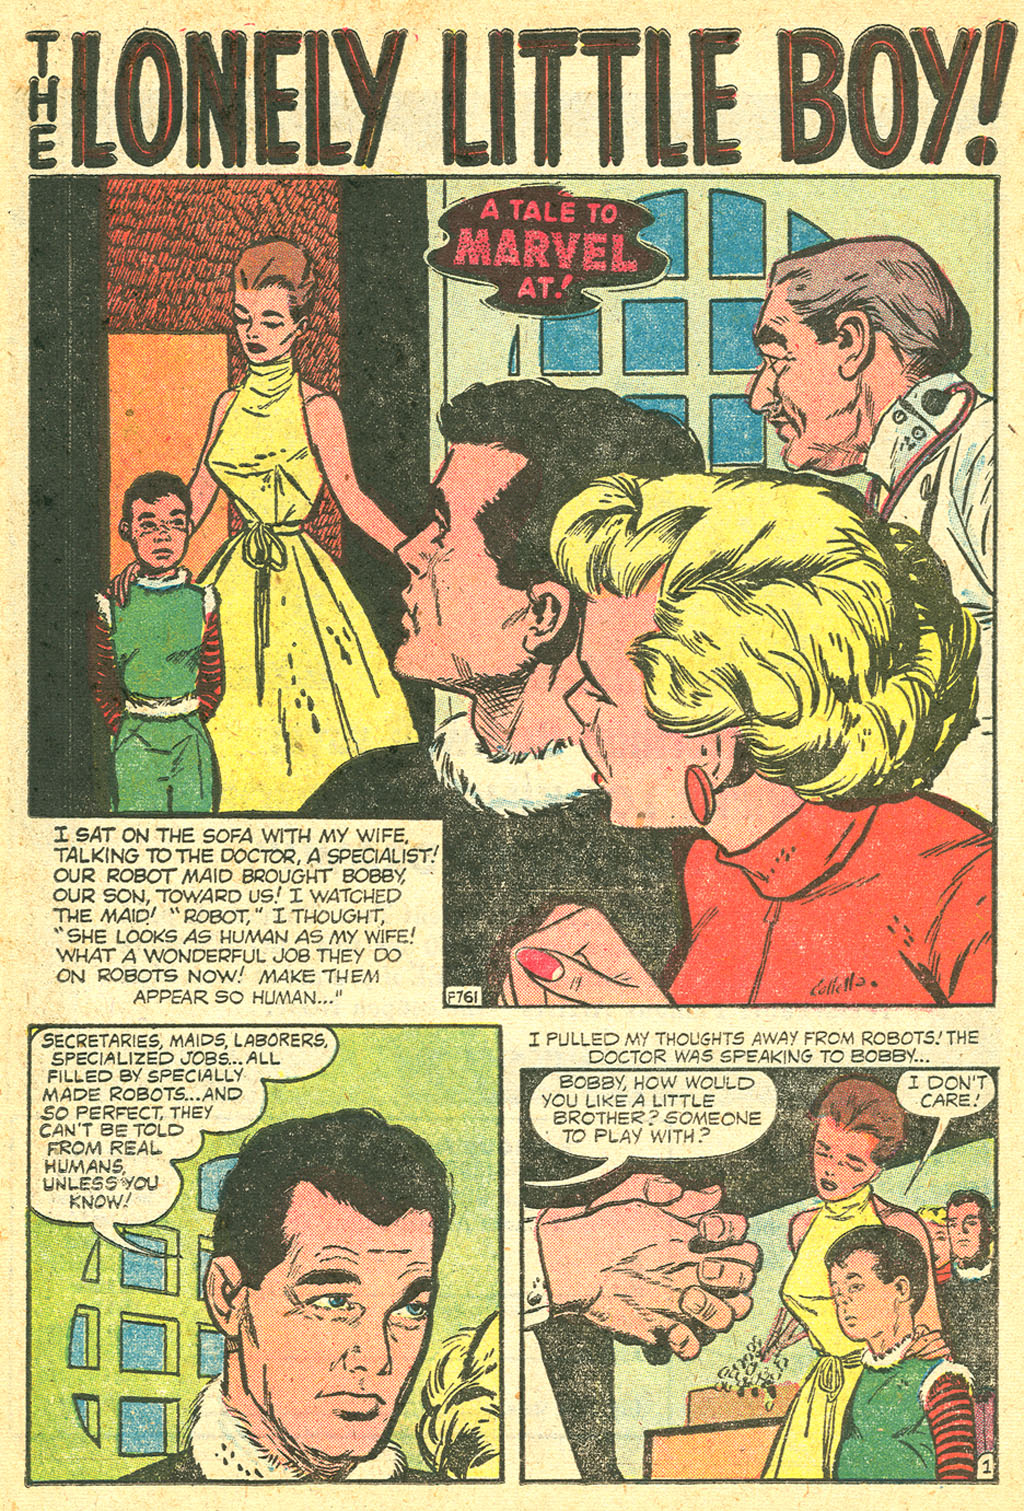 Marvel Tales (1949) 133 Page 9